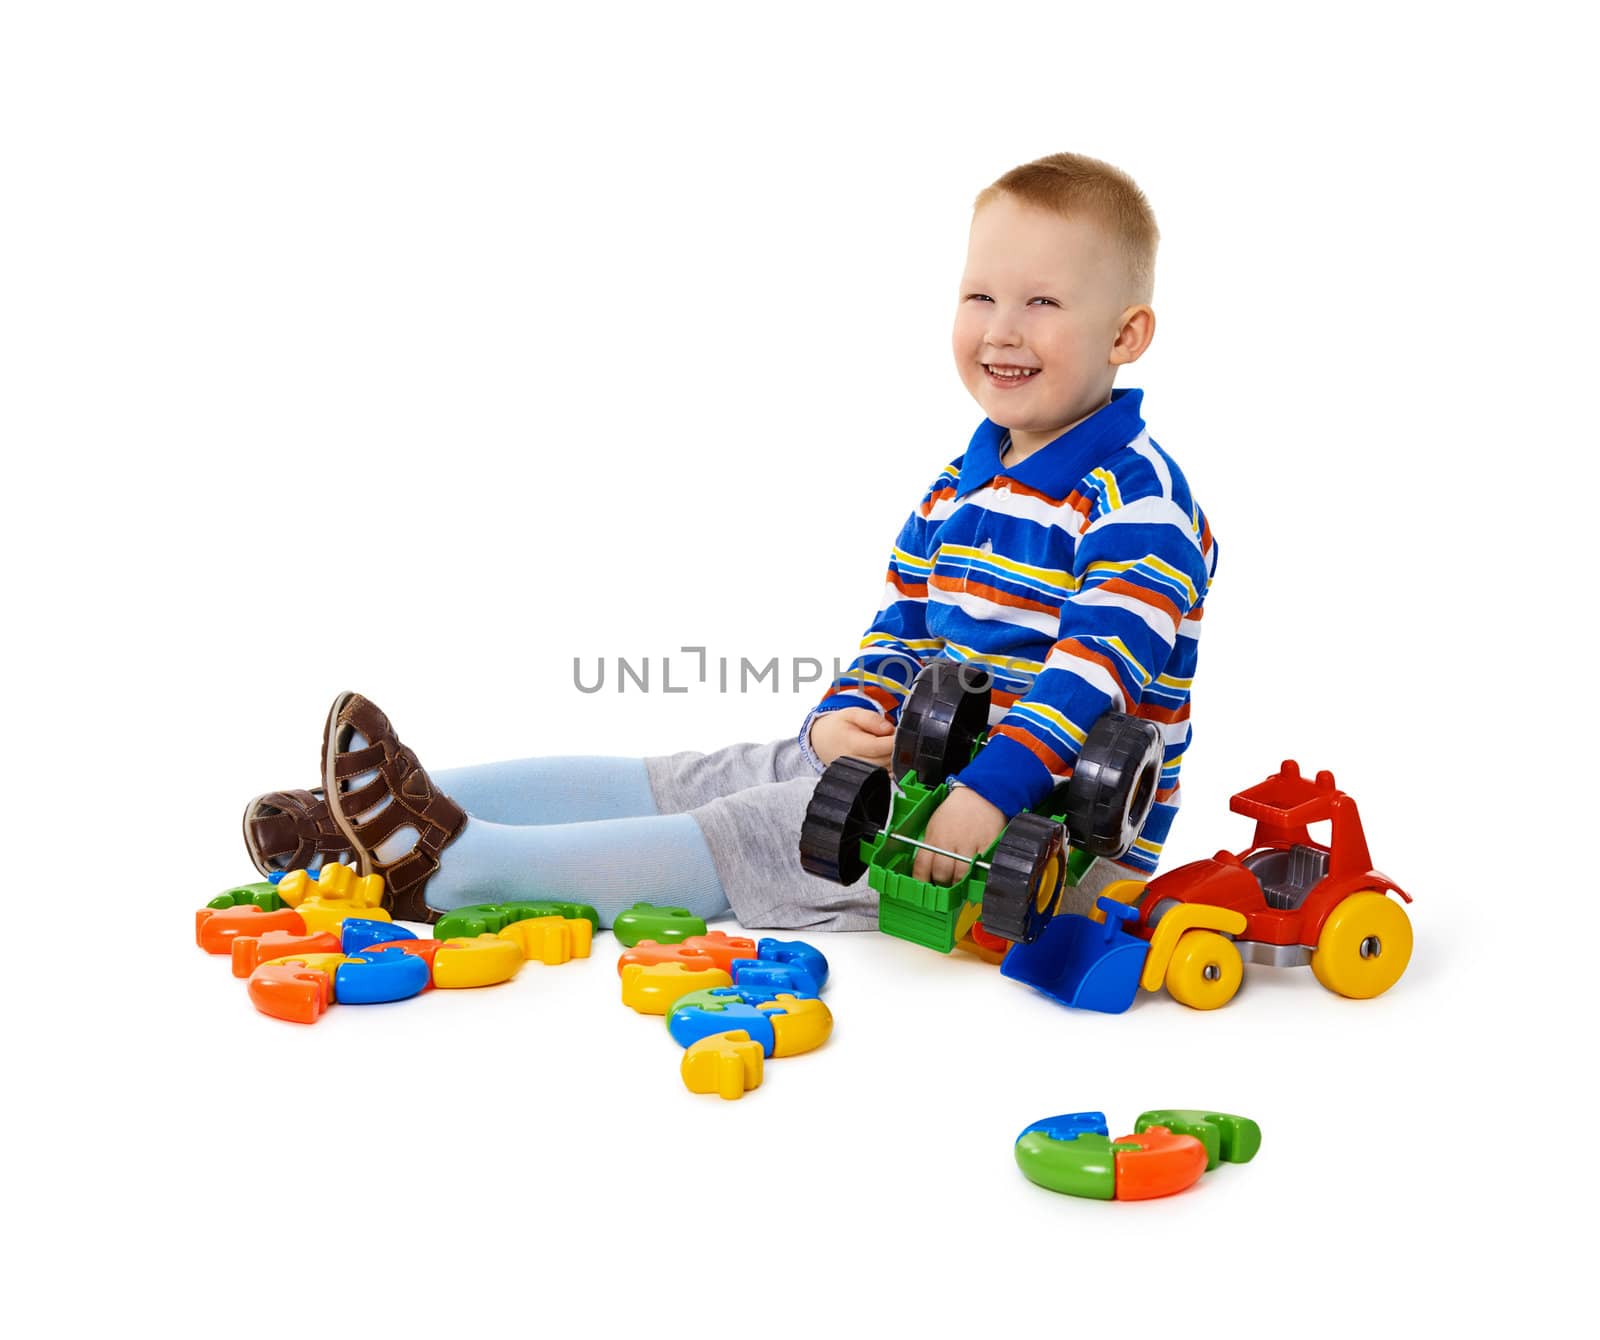 Cheery little boy sitting among colorful toys on the floor